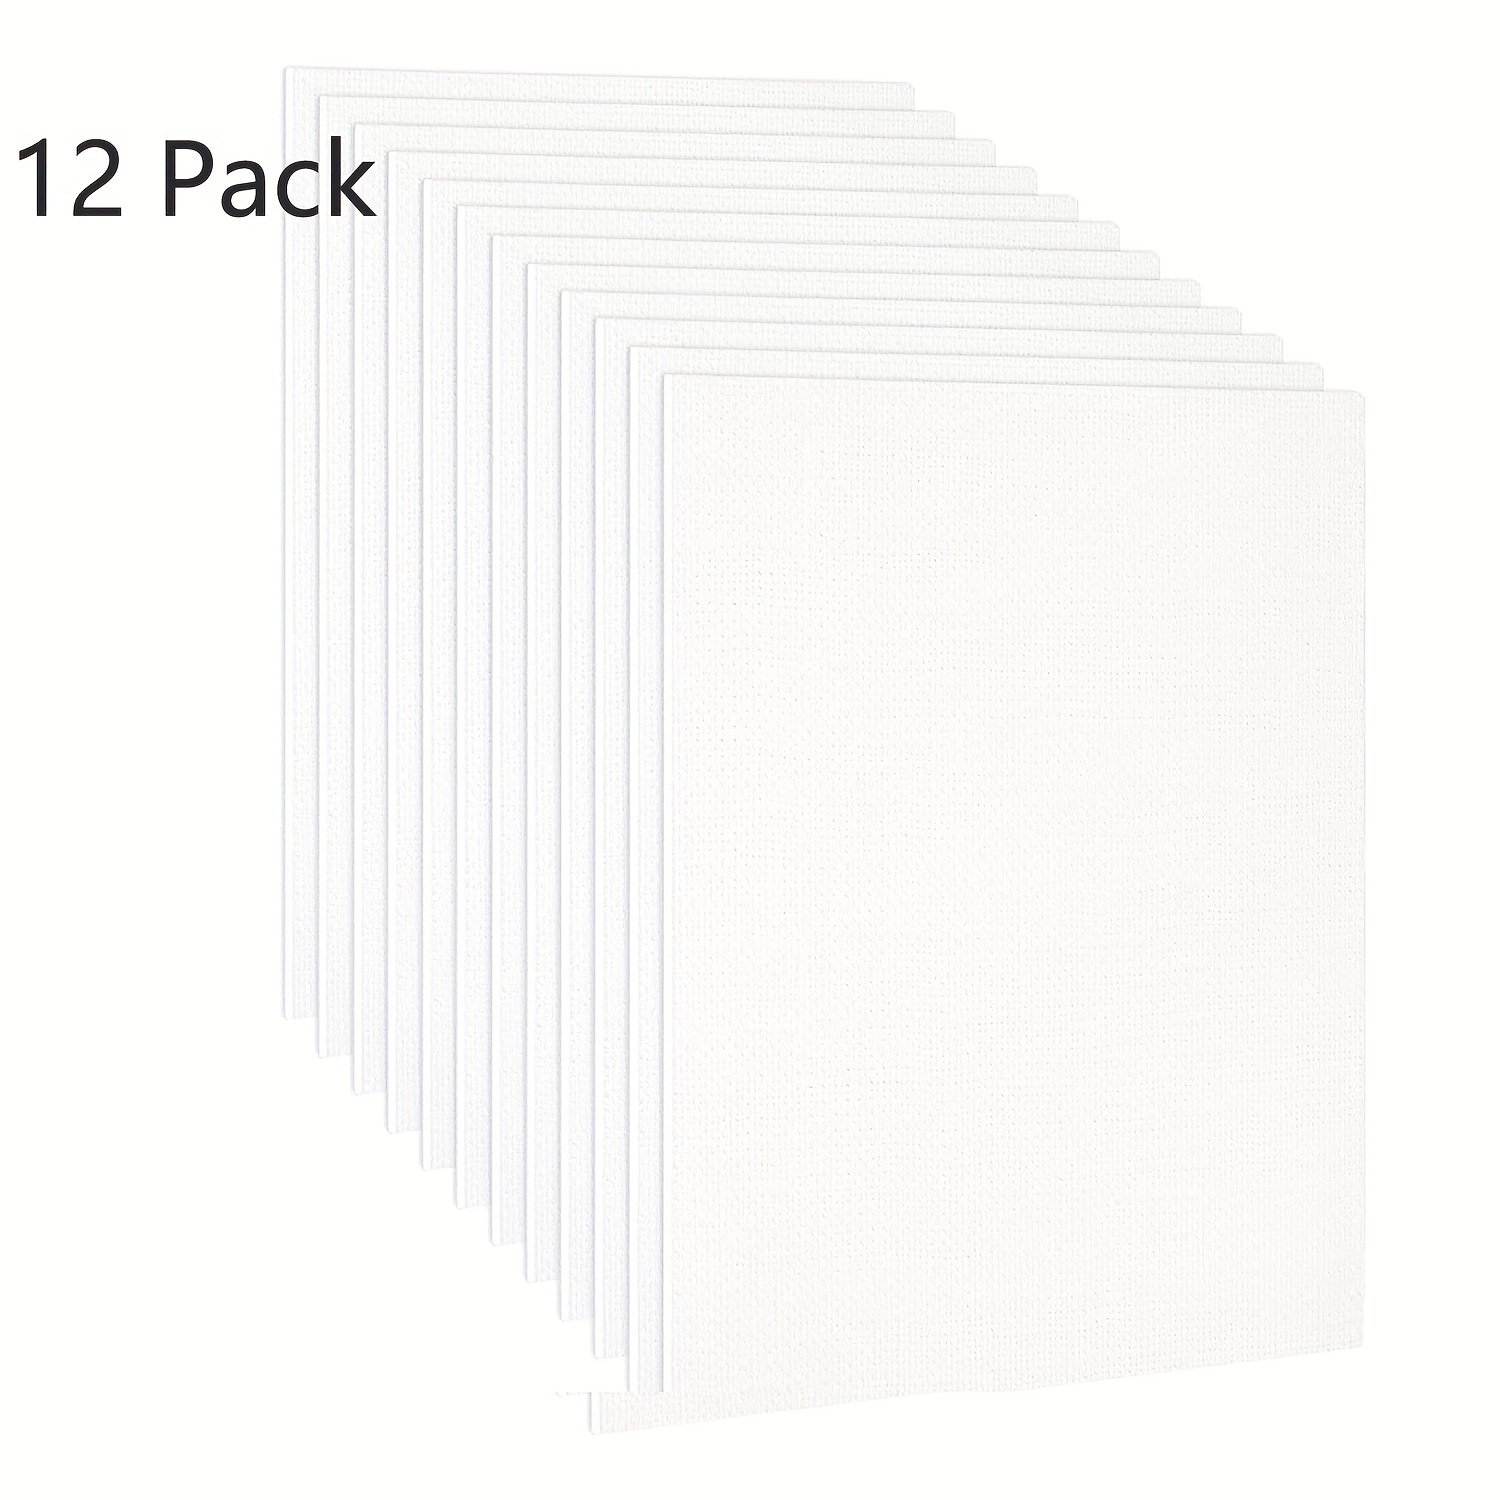 conda Canvases for Painting 12 x 12 inch, 14 Pack, Blank White Canvas  Boards, Primed, 100% Cotton, Quality Acid Free Artist Canvas Panels for  Painting